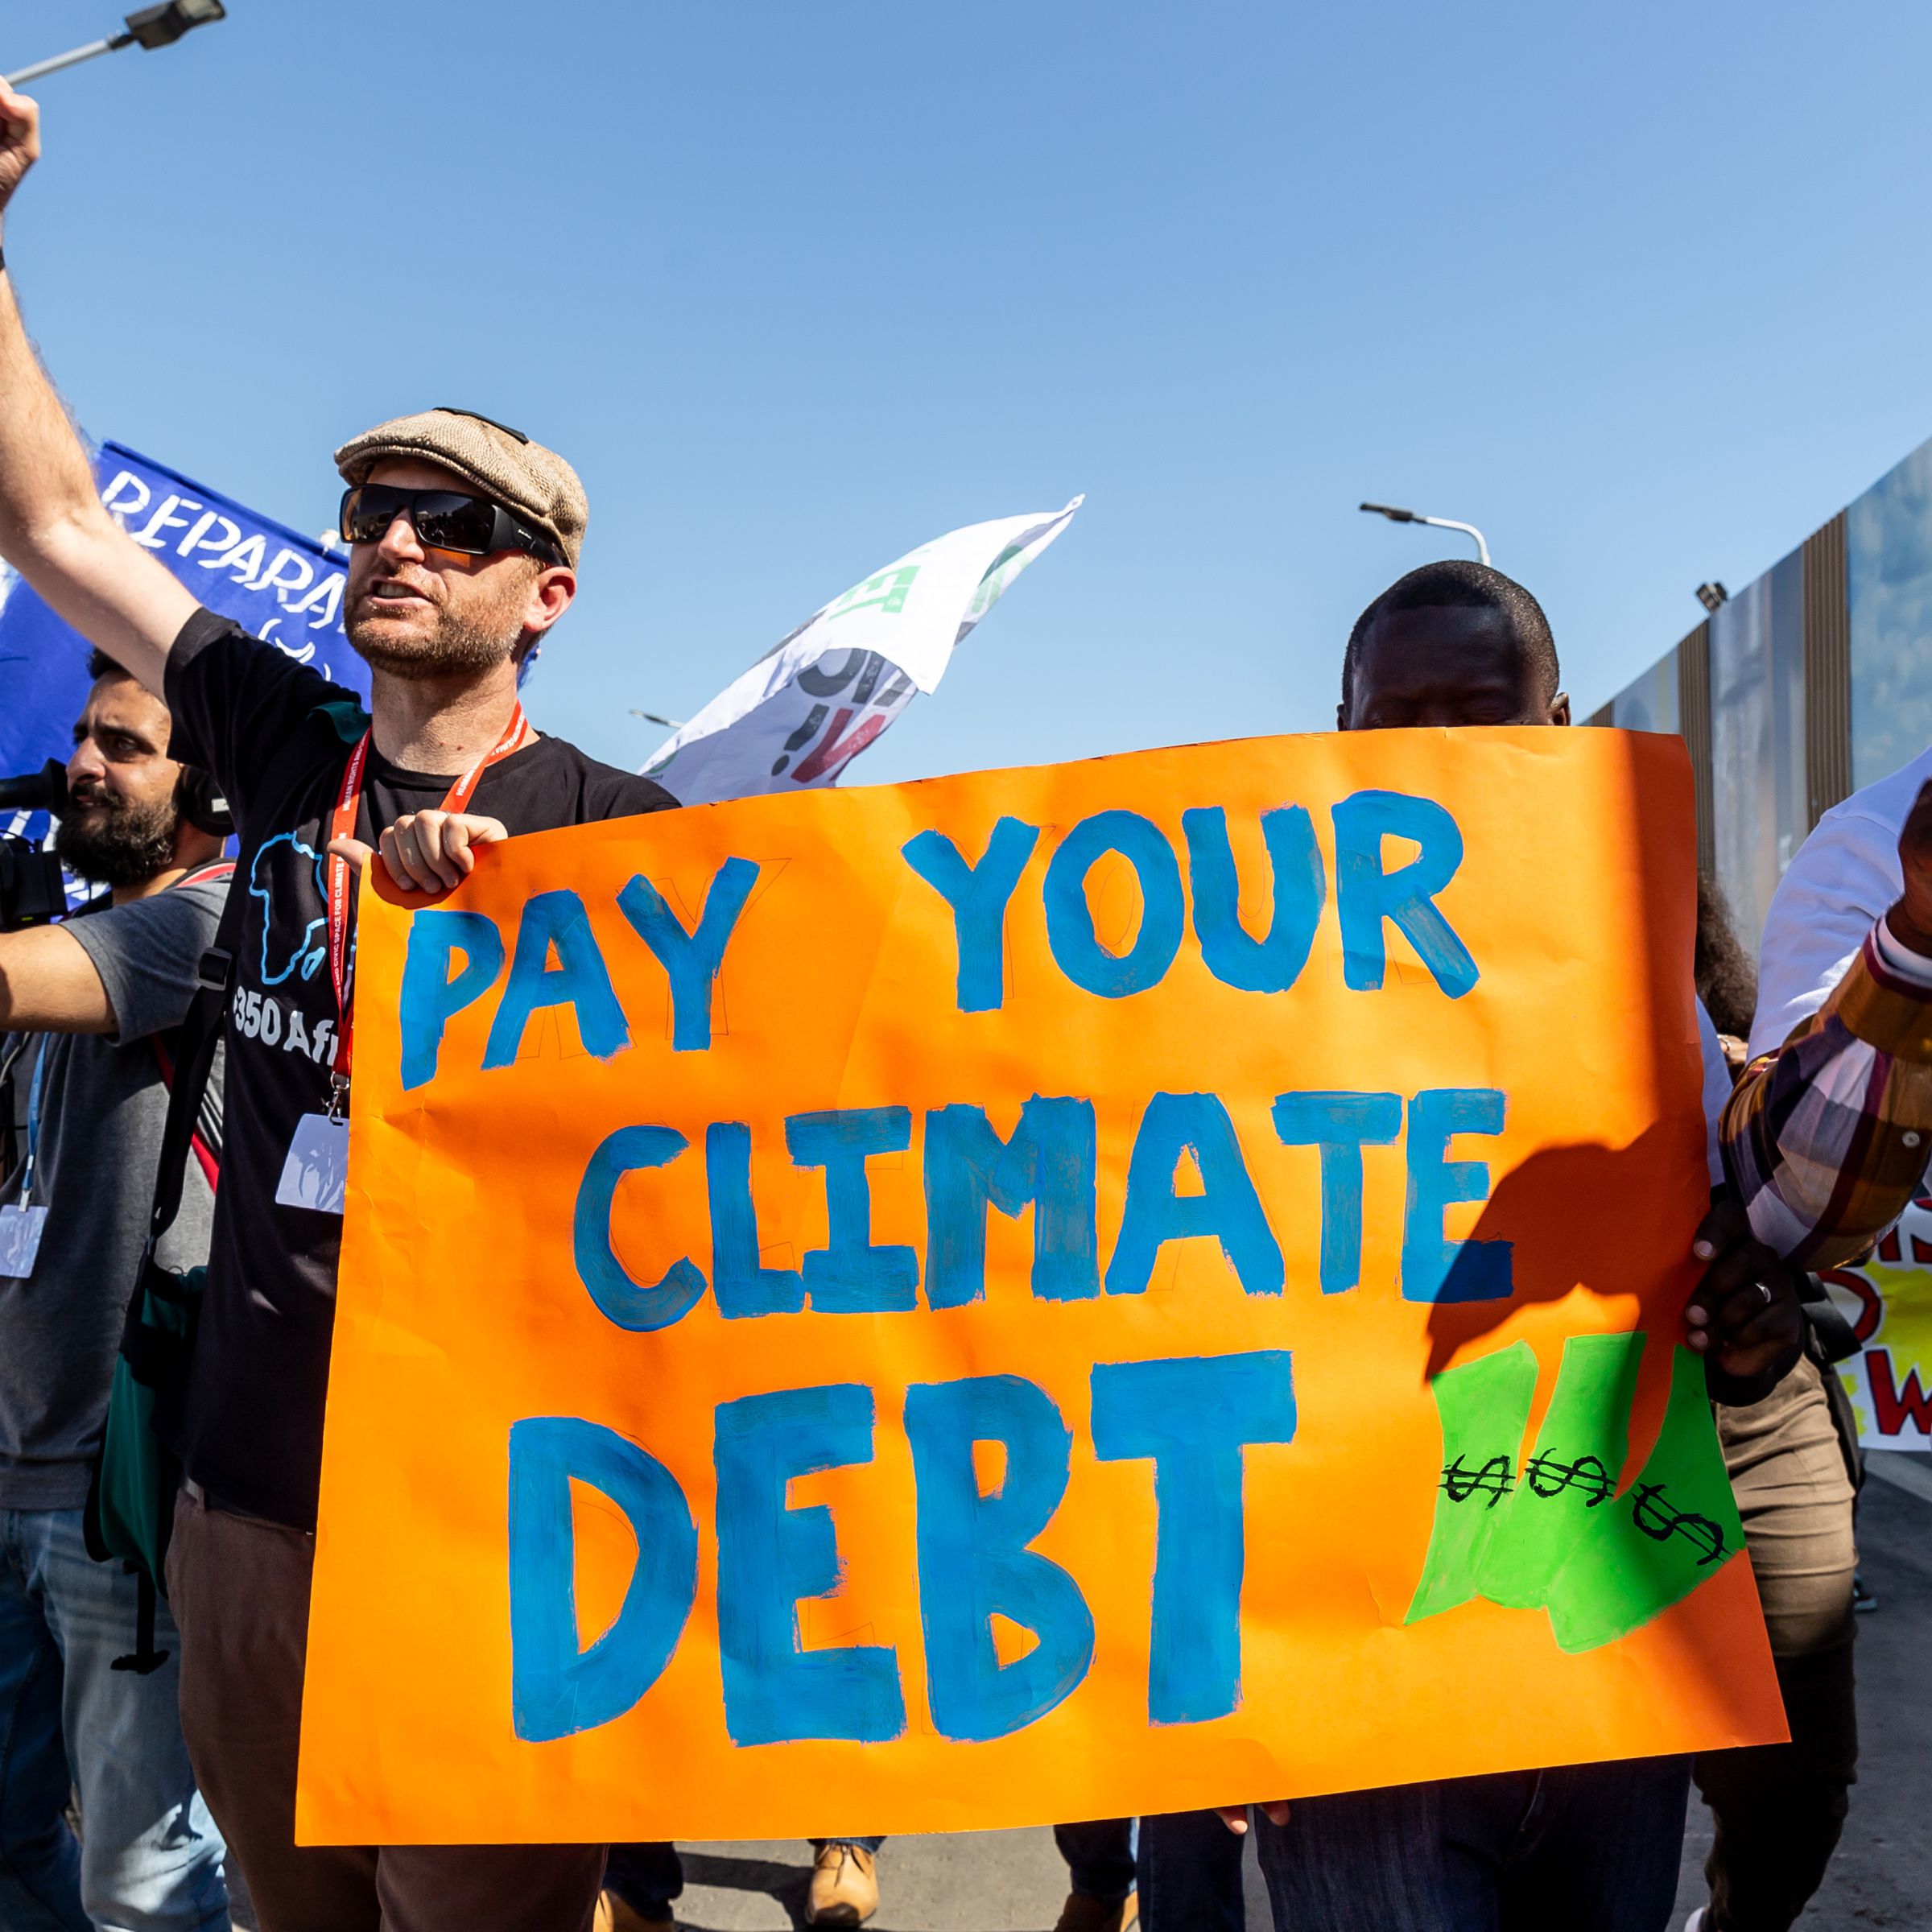 Protesters carry a sign that says “Pay your climate debt.”